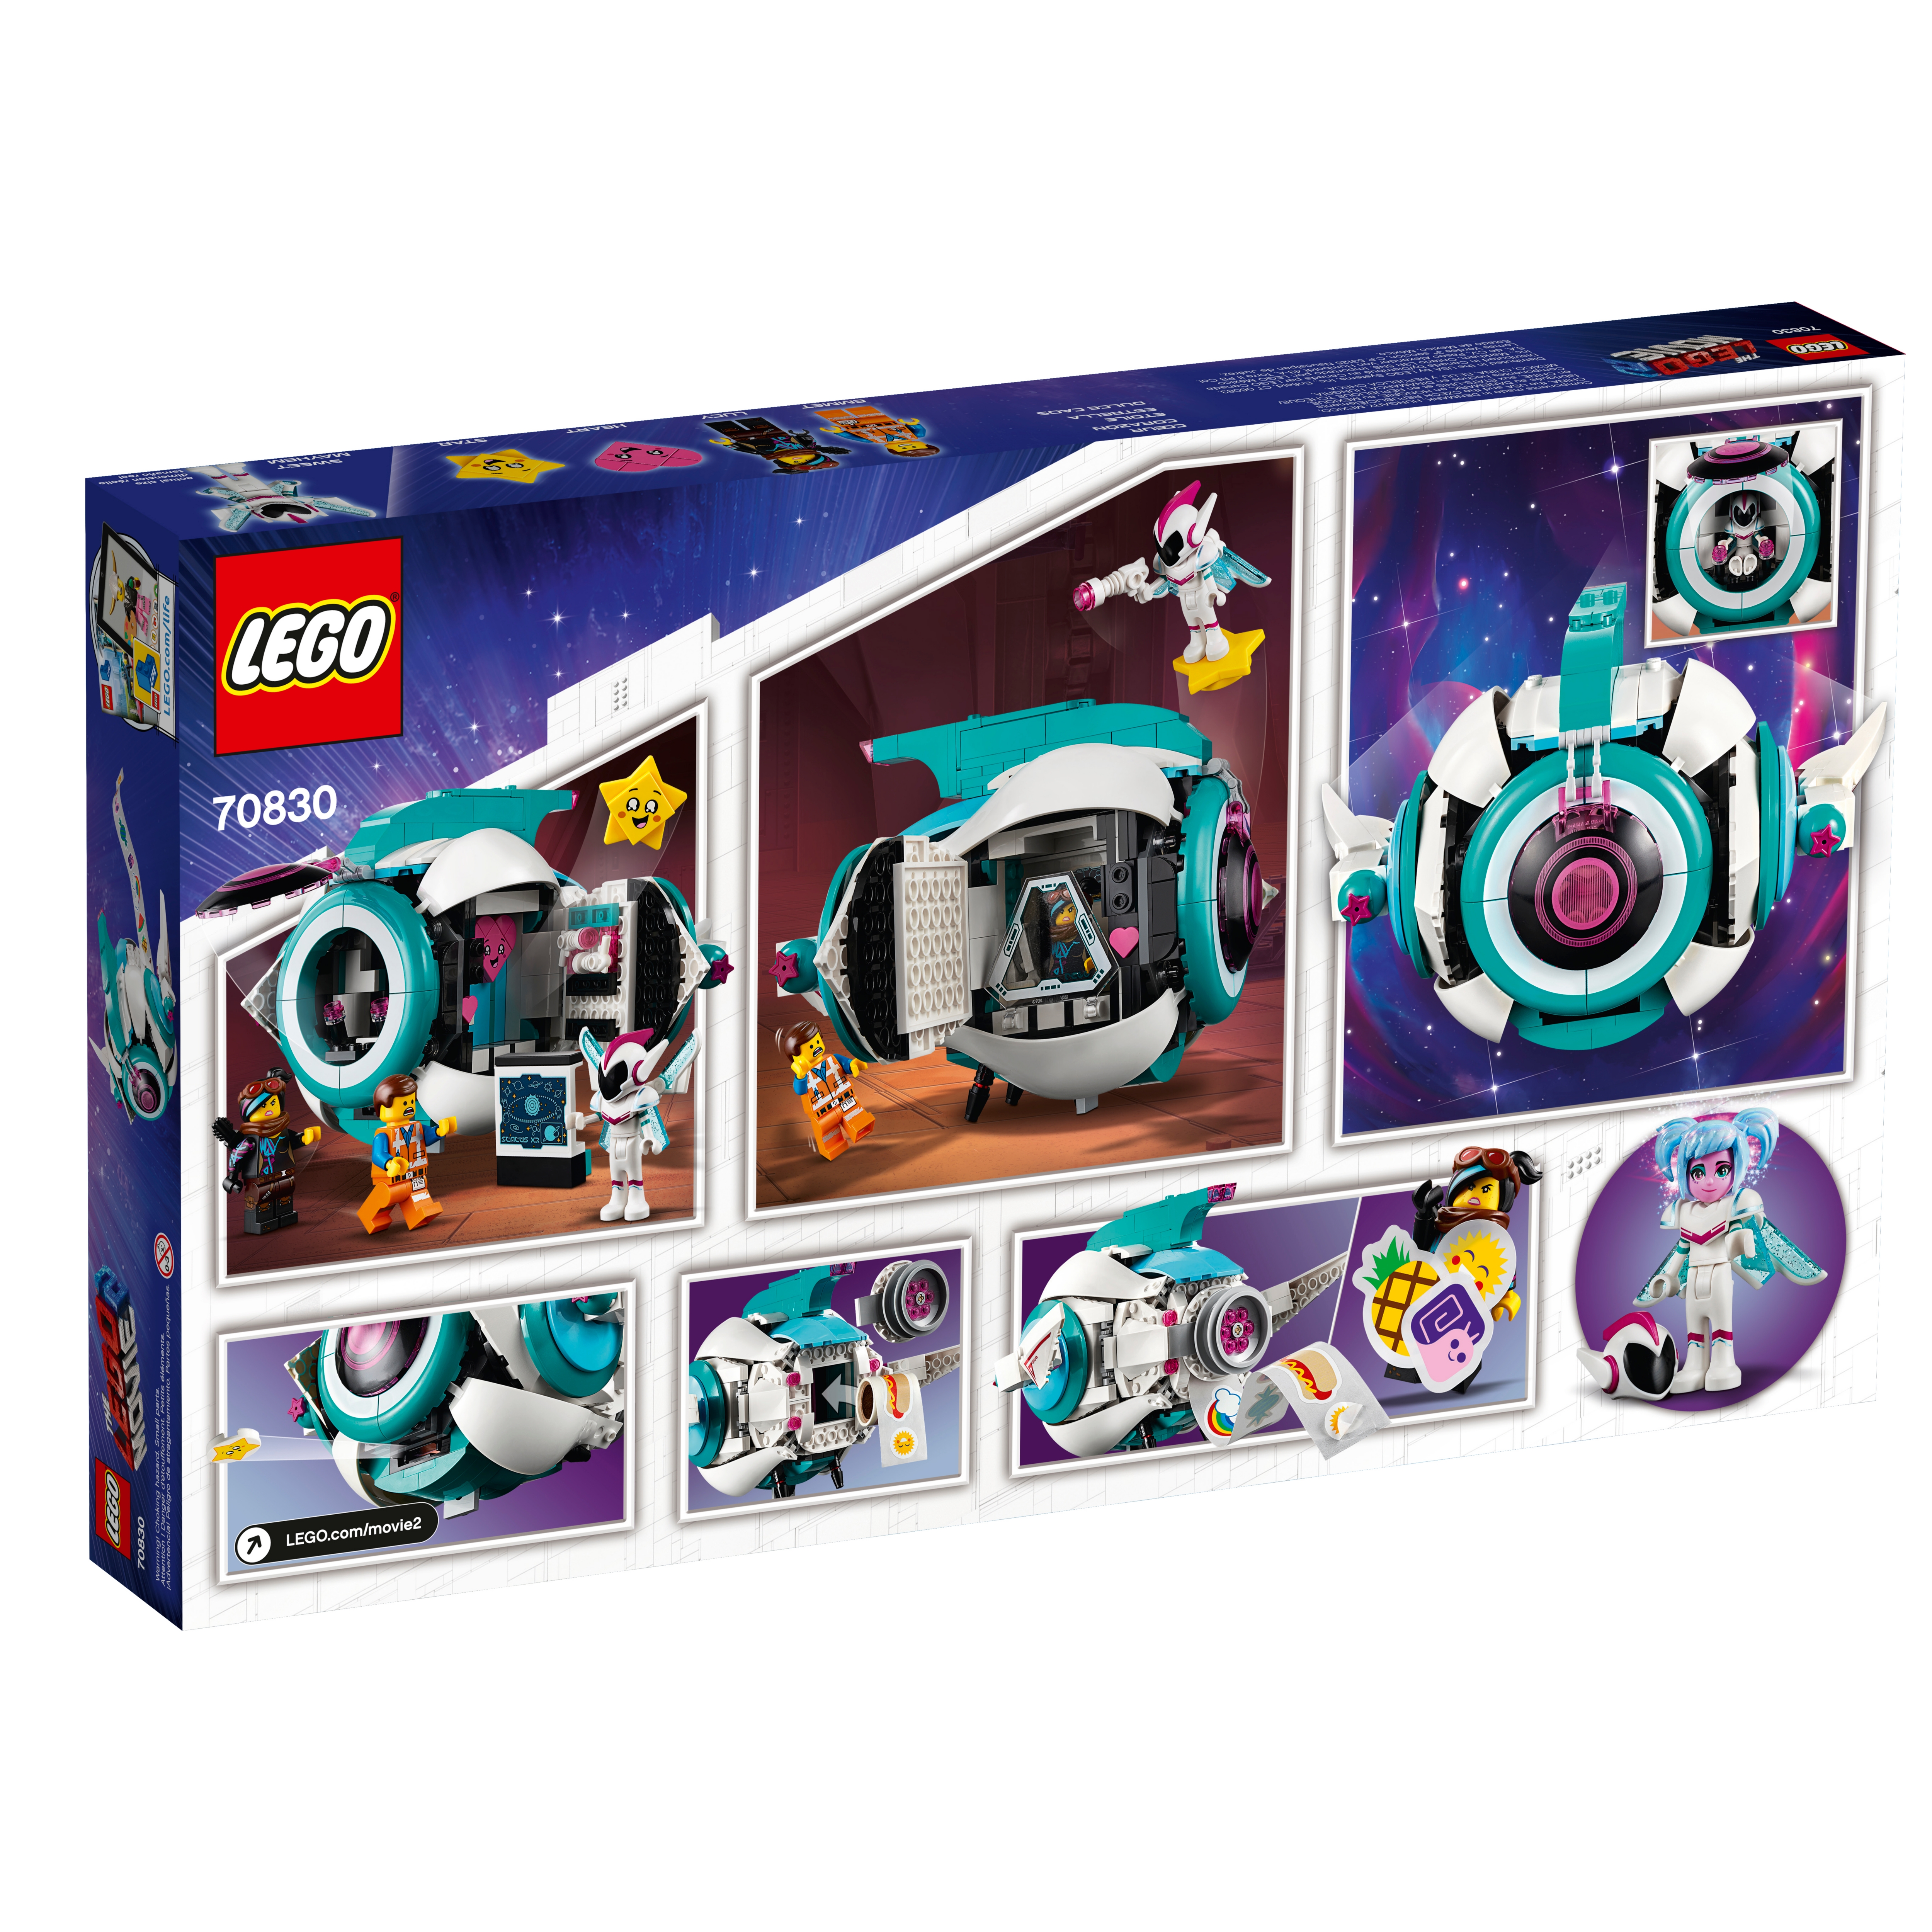 Syndicate Maleri grube Sweet Mayhem's Systar Starship! 70830 | THE LEGO® MOVIE 2™ | Buy online at  the Official LEGO® Shop US